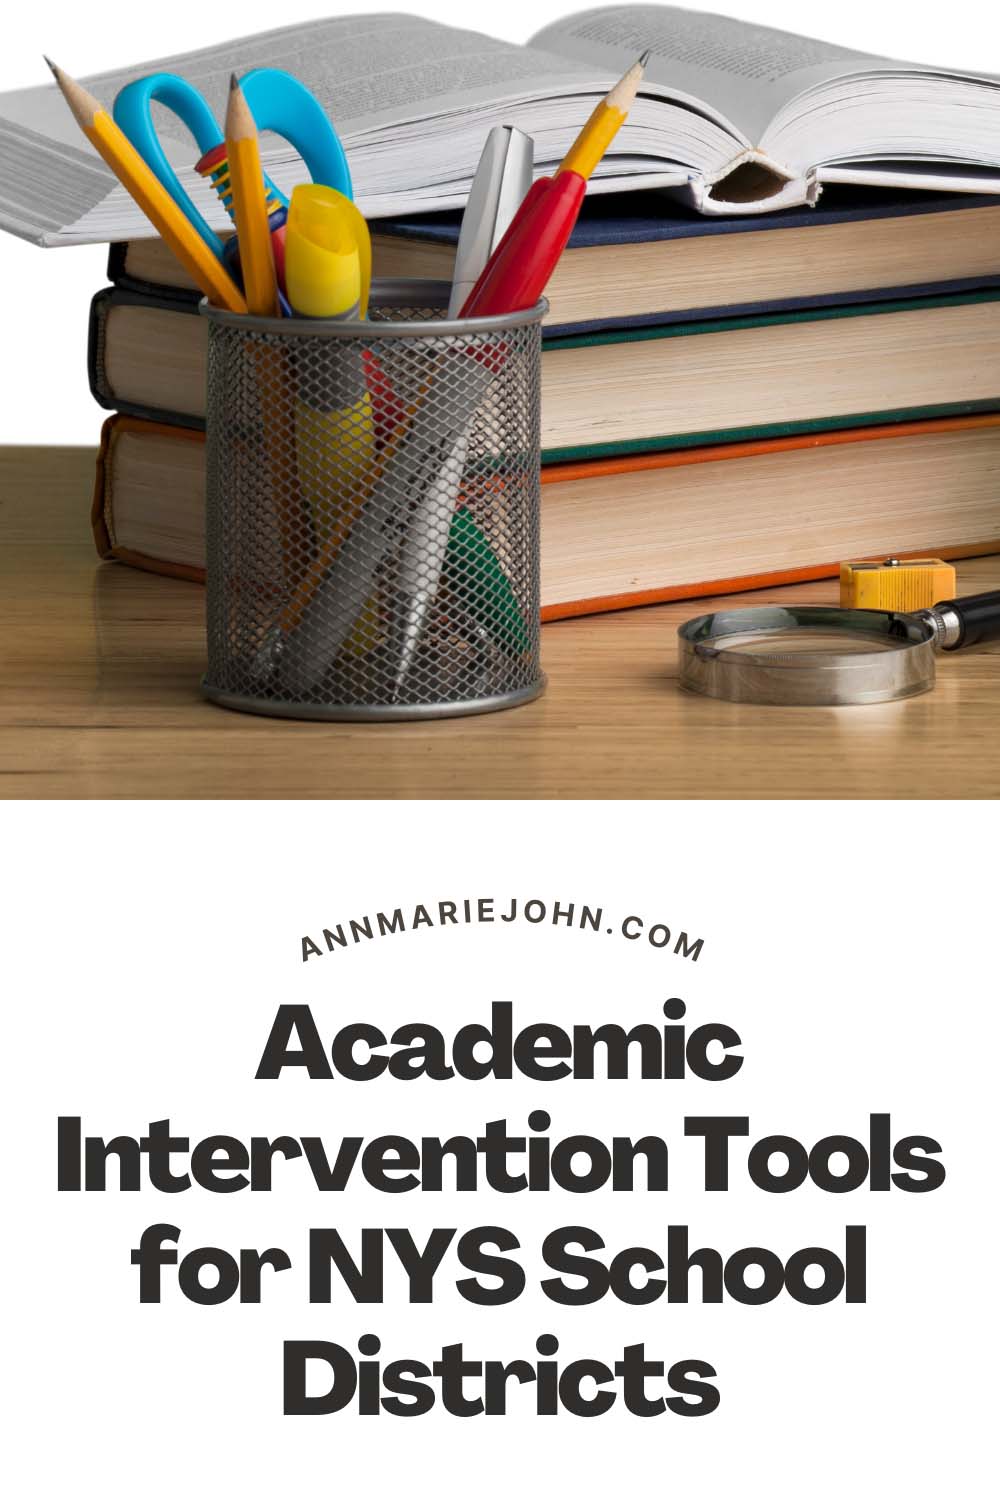 Academic Intervention Tools for NYS School Districts